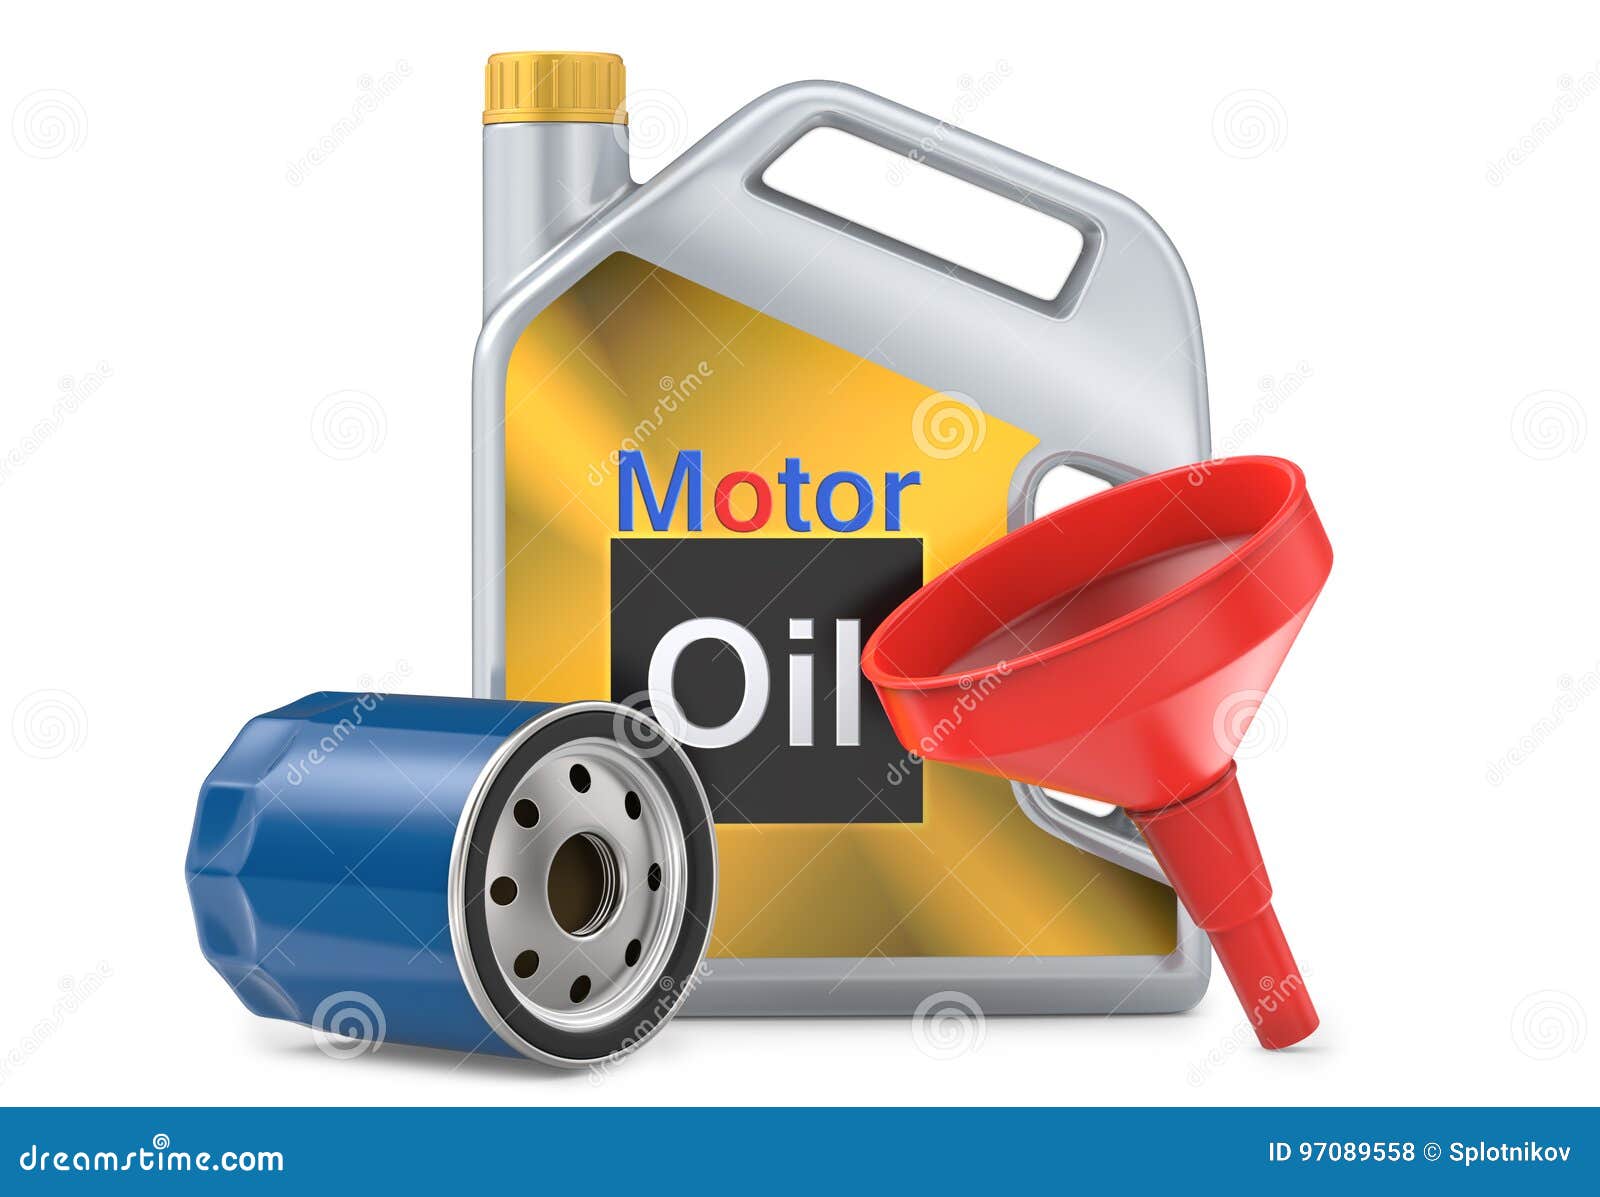 Car Oil Filters and Motor Oil Plastic Can, 3d Illustration Stock ...